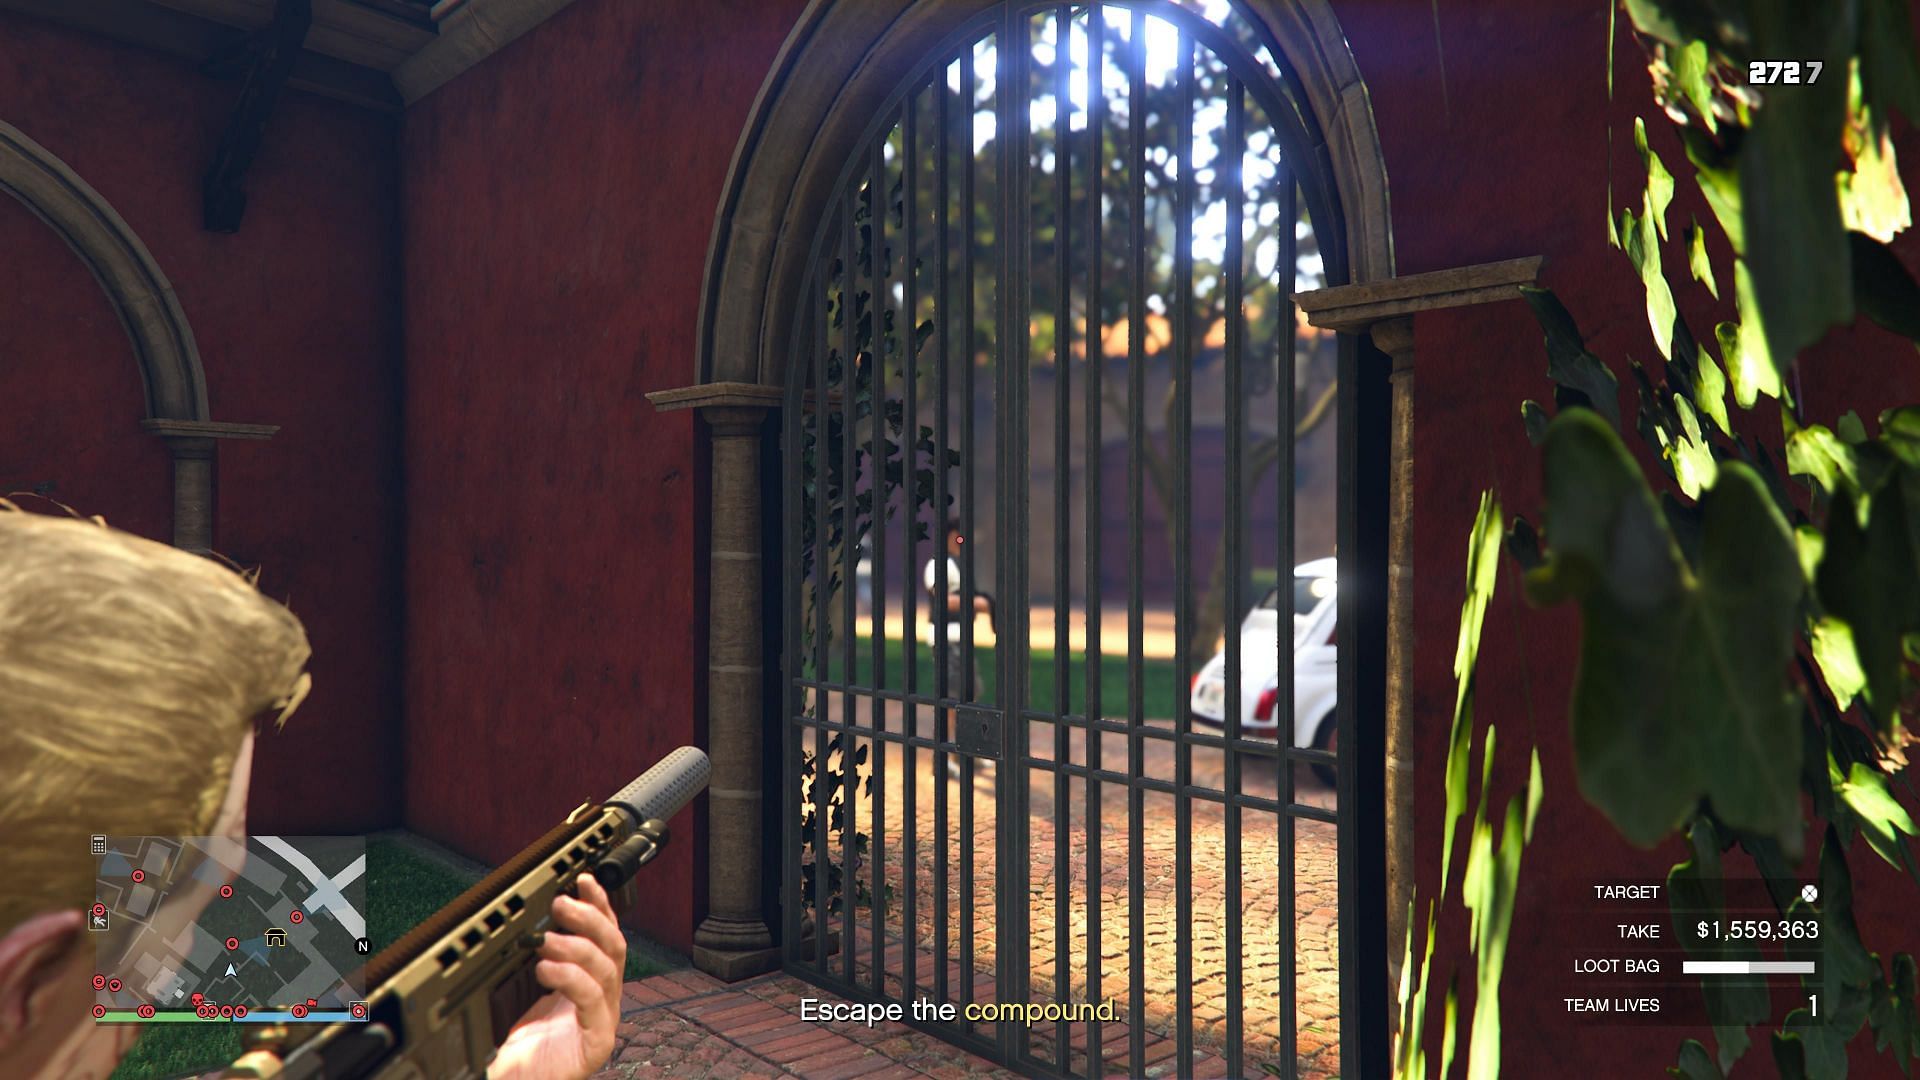 If you have the keys, this method will get you out quickly (Image via Rockstar Games)